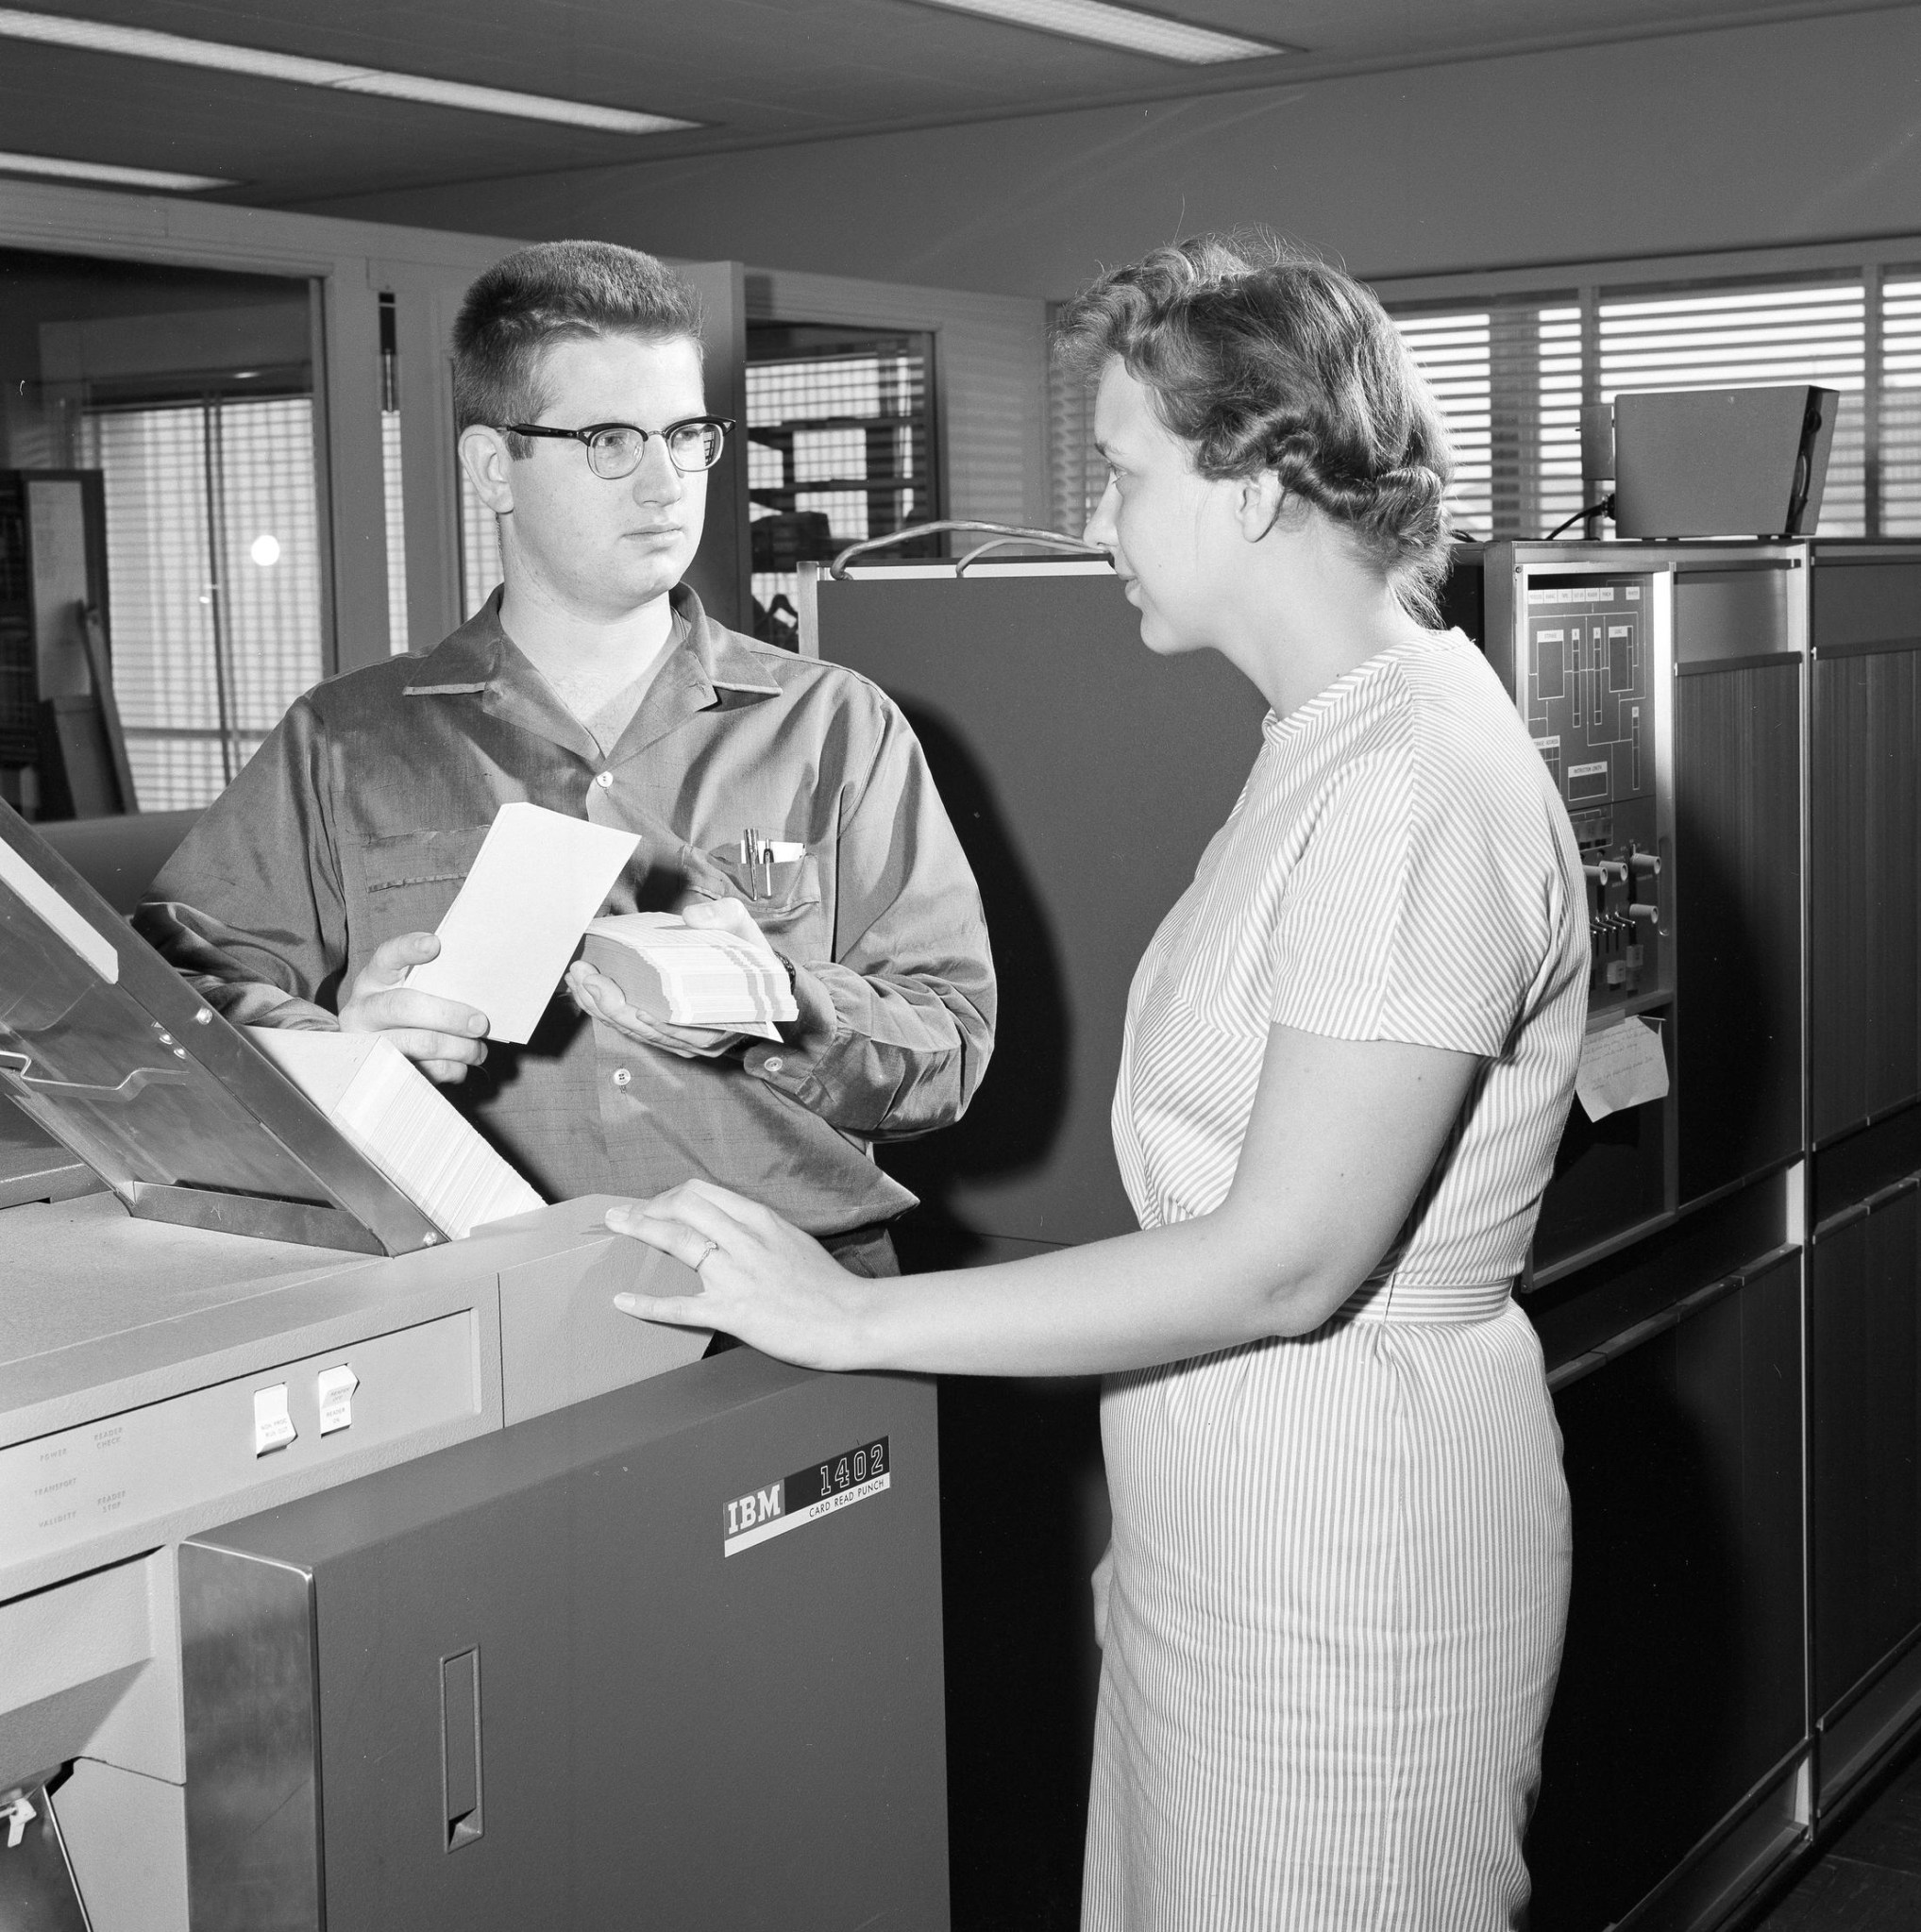 Man and woman working with computer equipment.